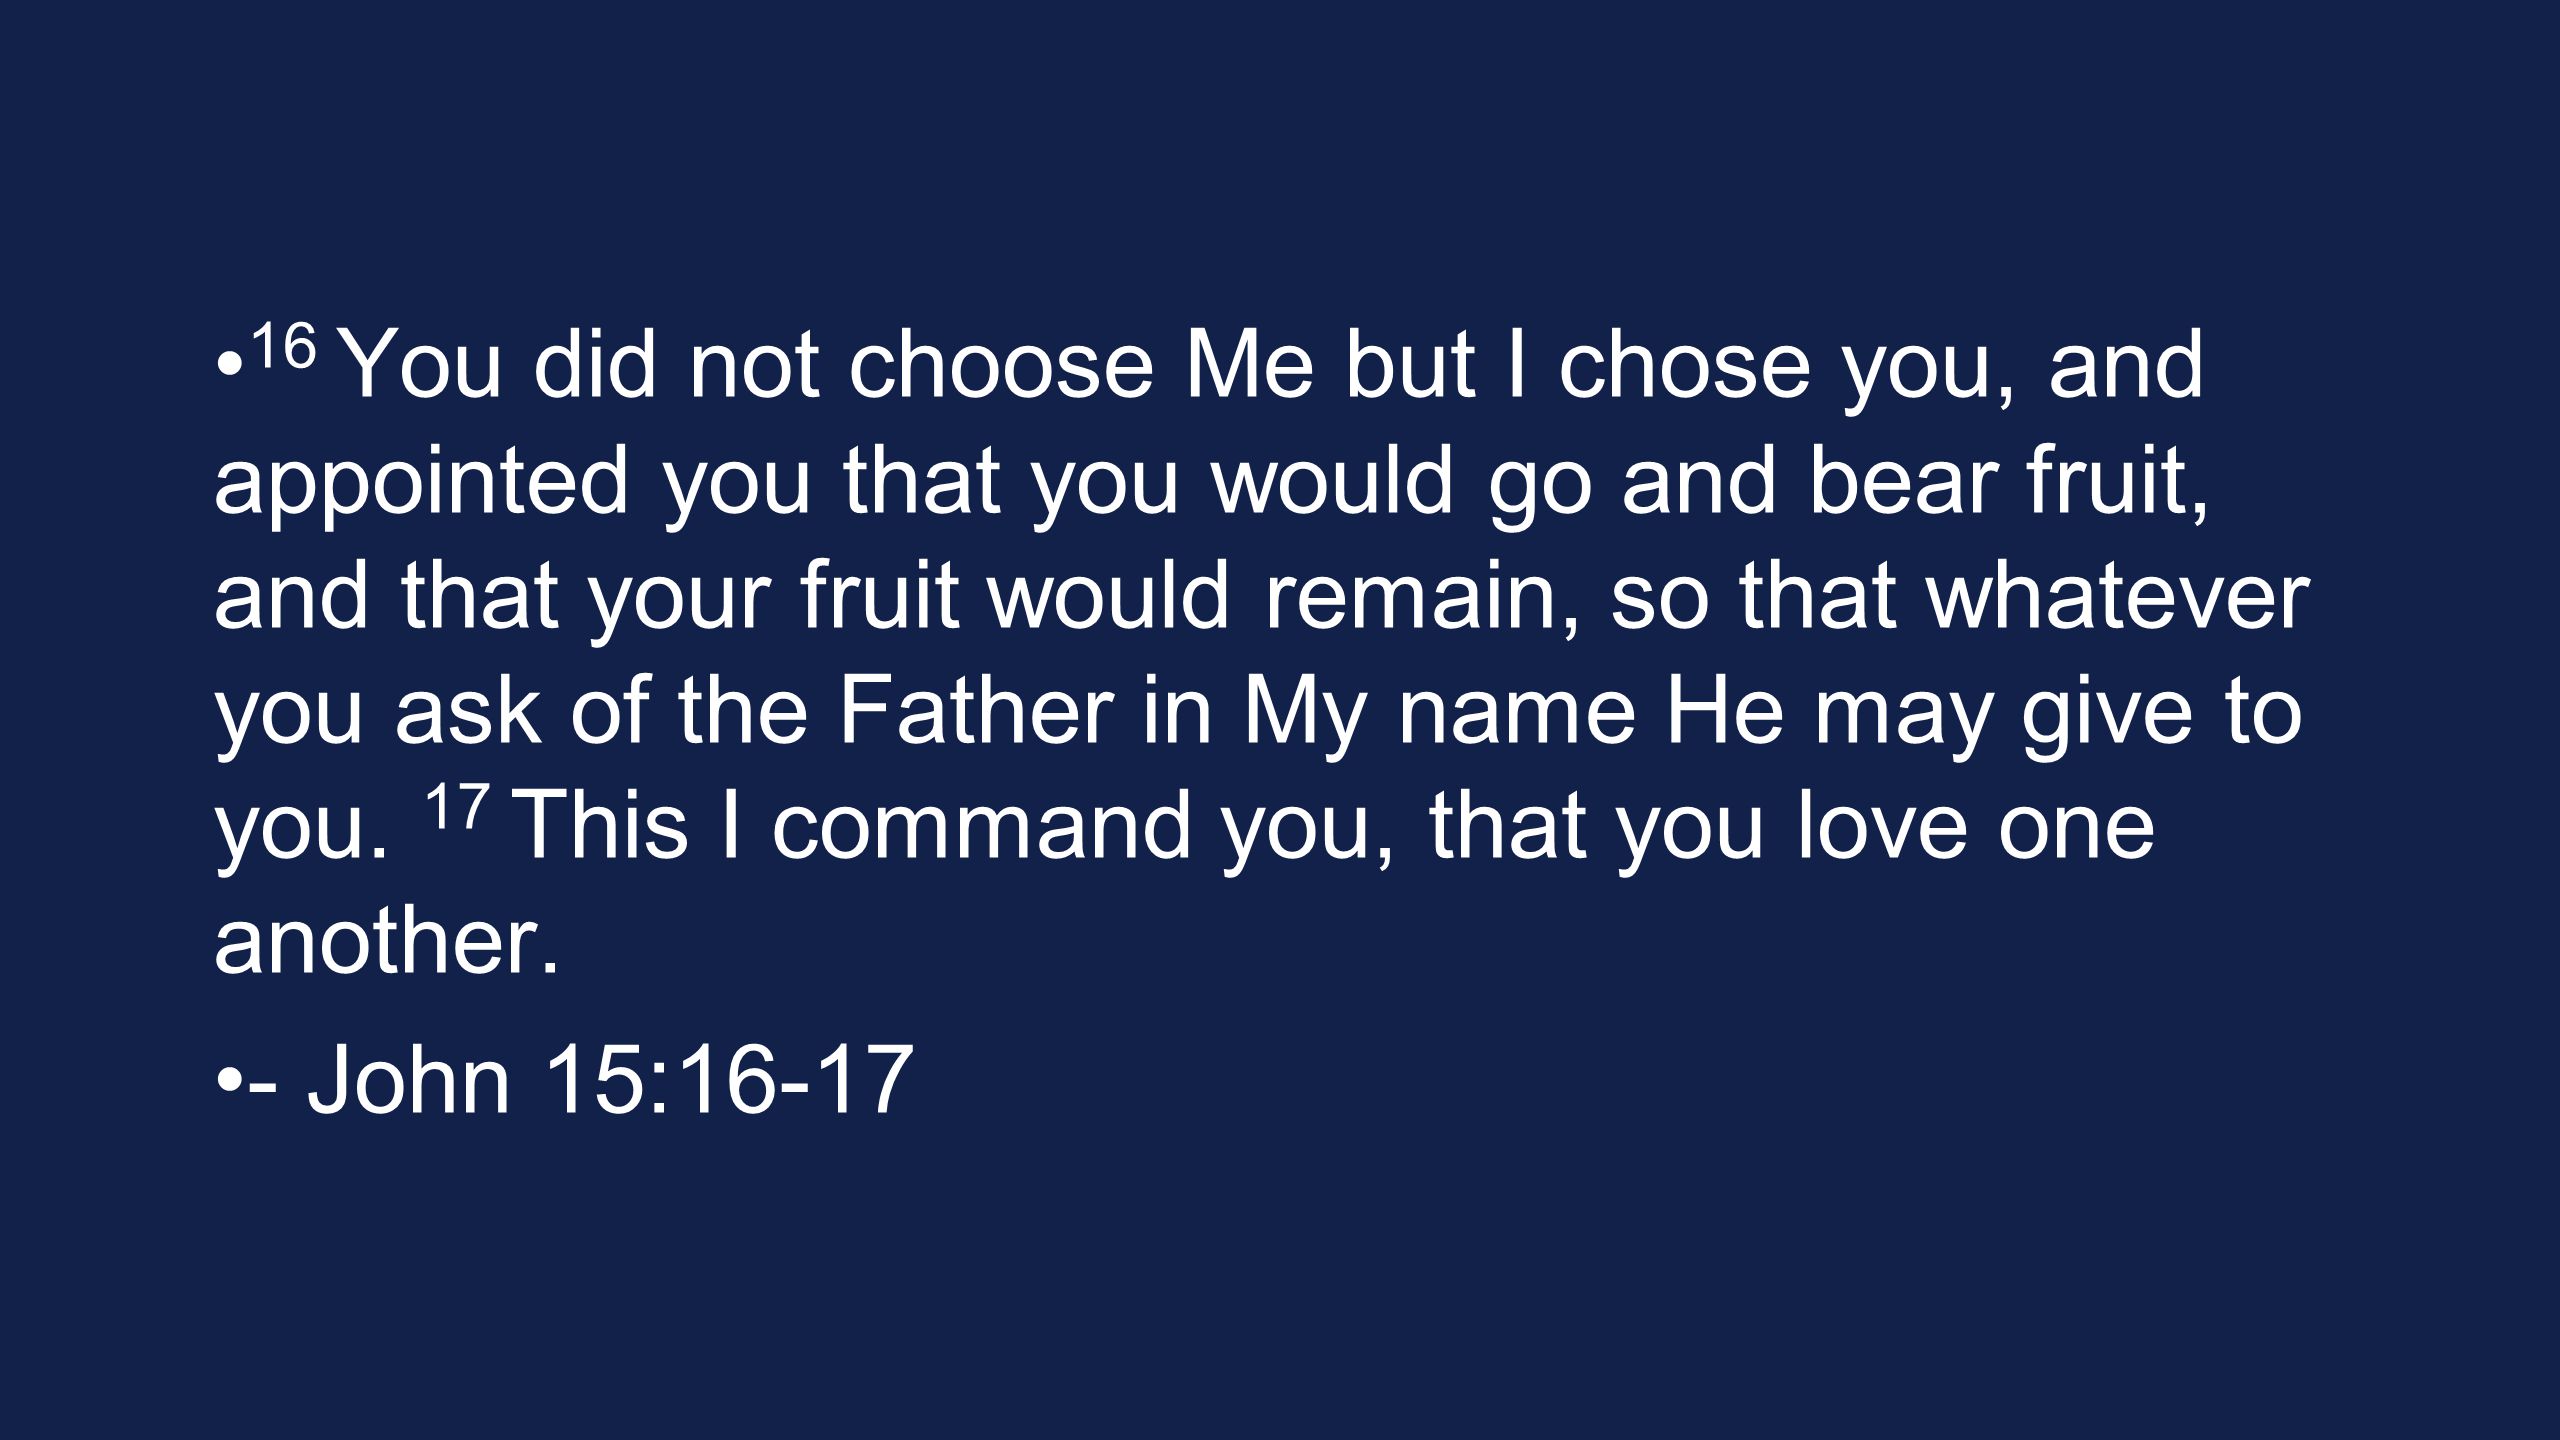 16 You did not choose Me but I chose you, and appointed you that you would go and bear fruit, and that your fruit would remain, so that whatever you ask of the Father in My name He may give to you.